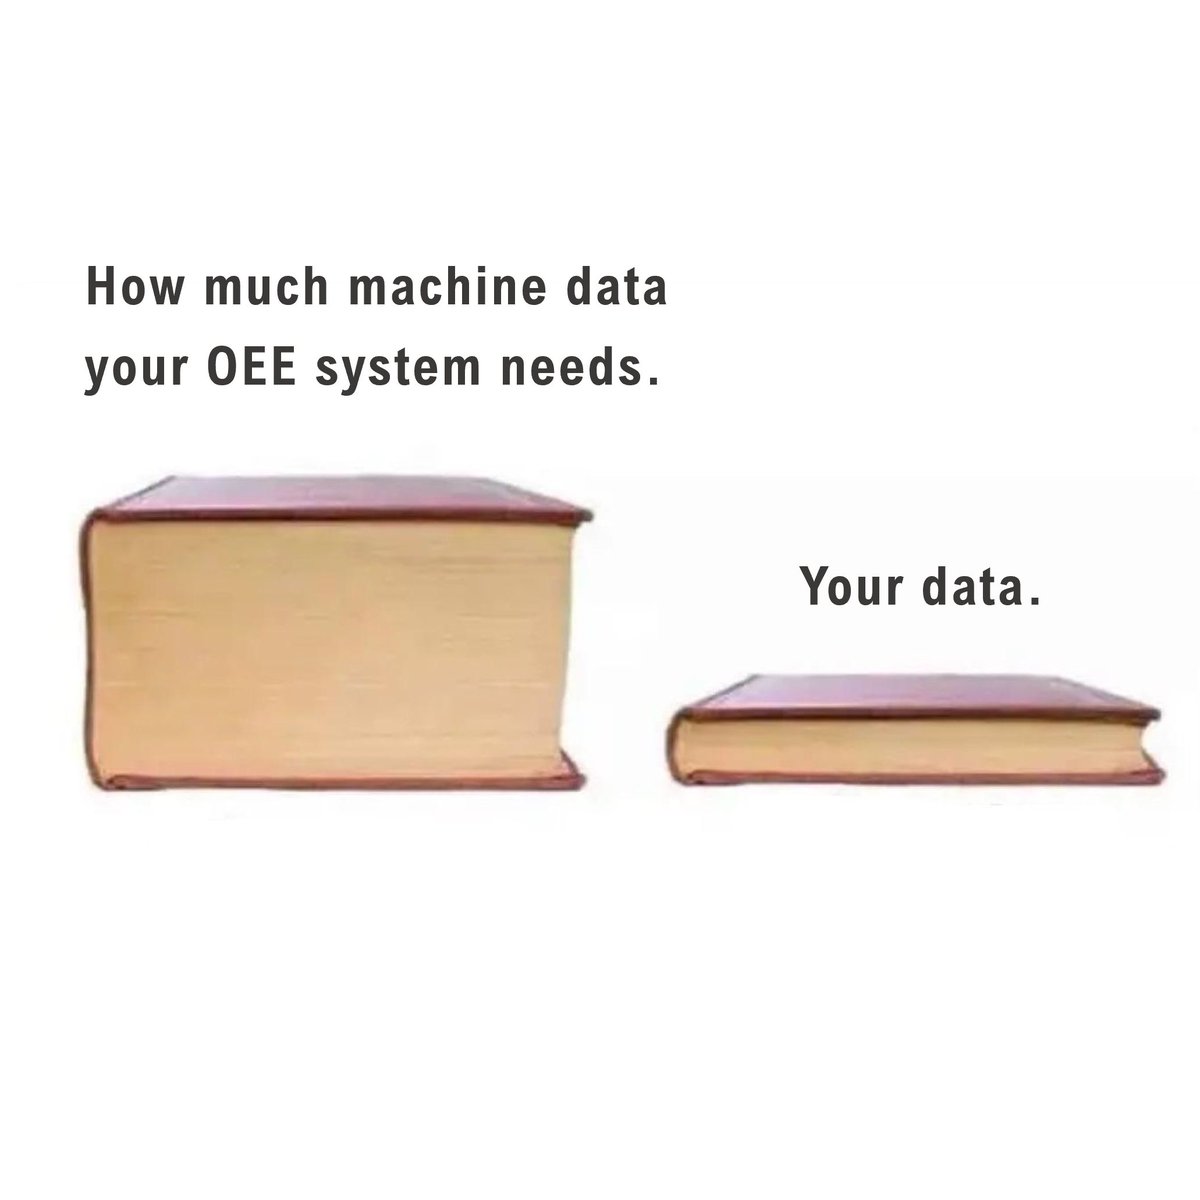 #OEE data: Do you have a lot or a little? hubs.ly/Q01nlZXt0

#industry40 #manufacturing #SmartManufacturing
#IndustrialData
#BigData #OPCUA #MTConnect #industria40
#SmartFactory #ManufacturingIndustry
#DigitalTransformation